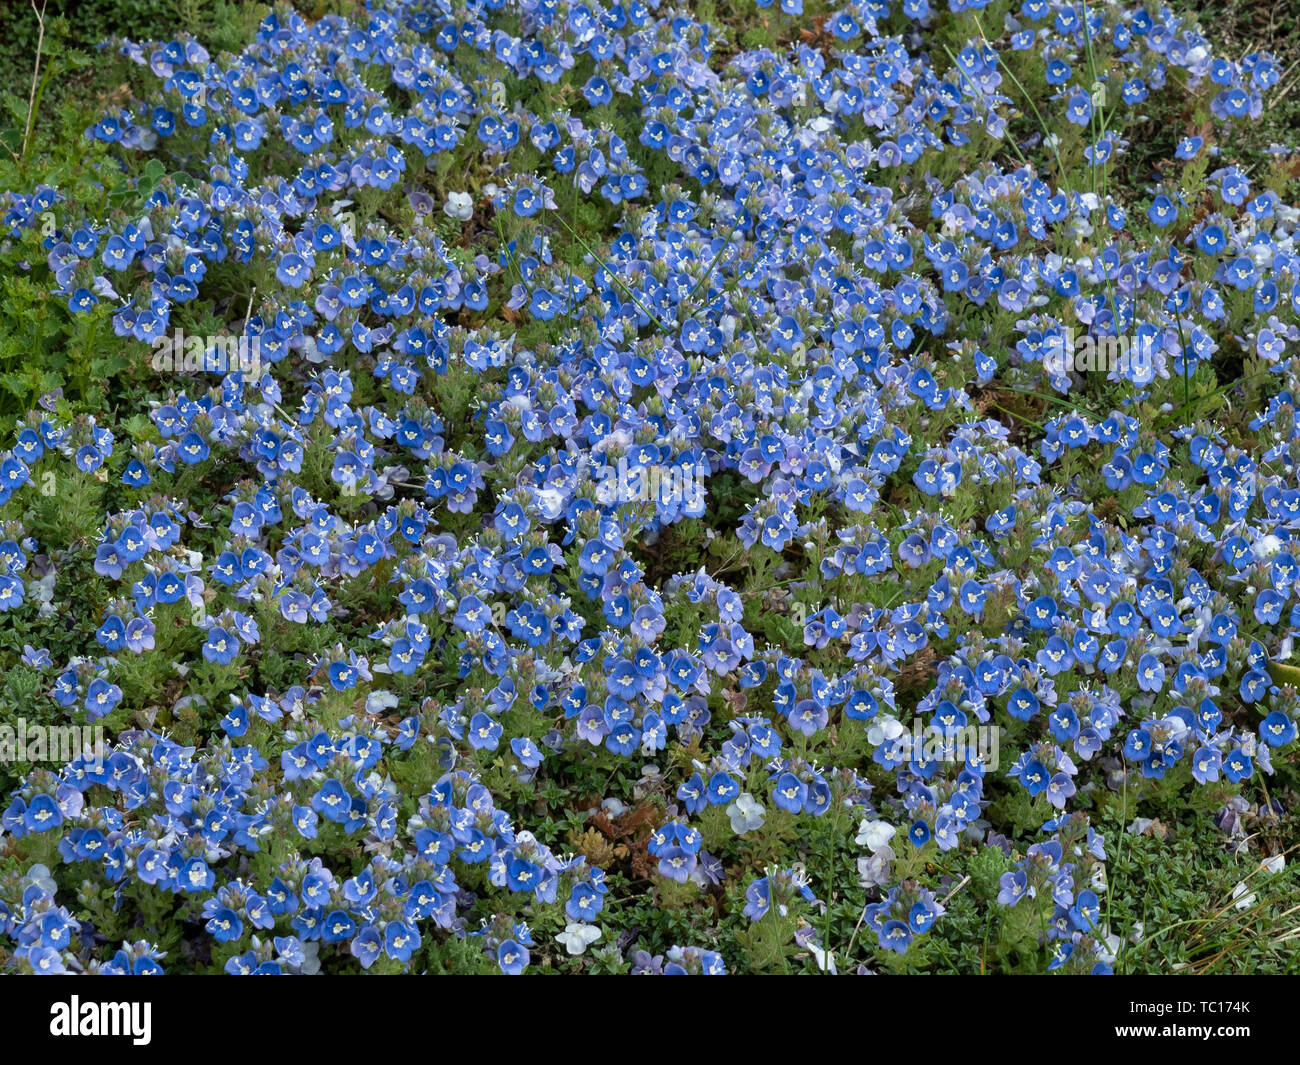 A pale blue carpet of Veronica pectinate growing over the edge of a paved area Stock Photo